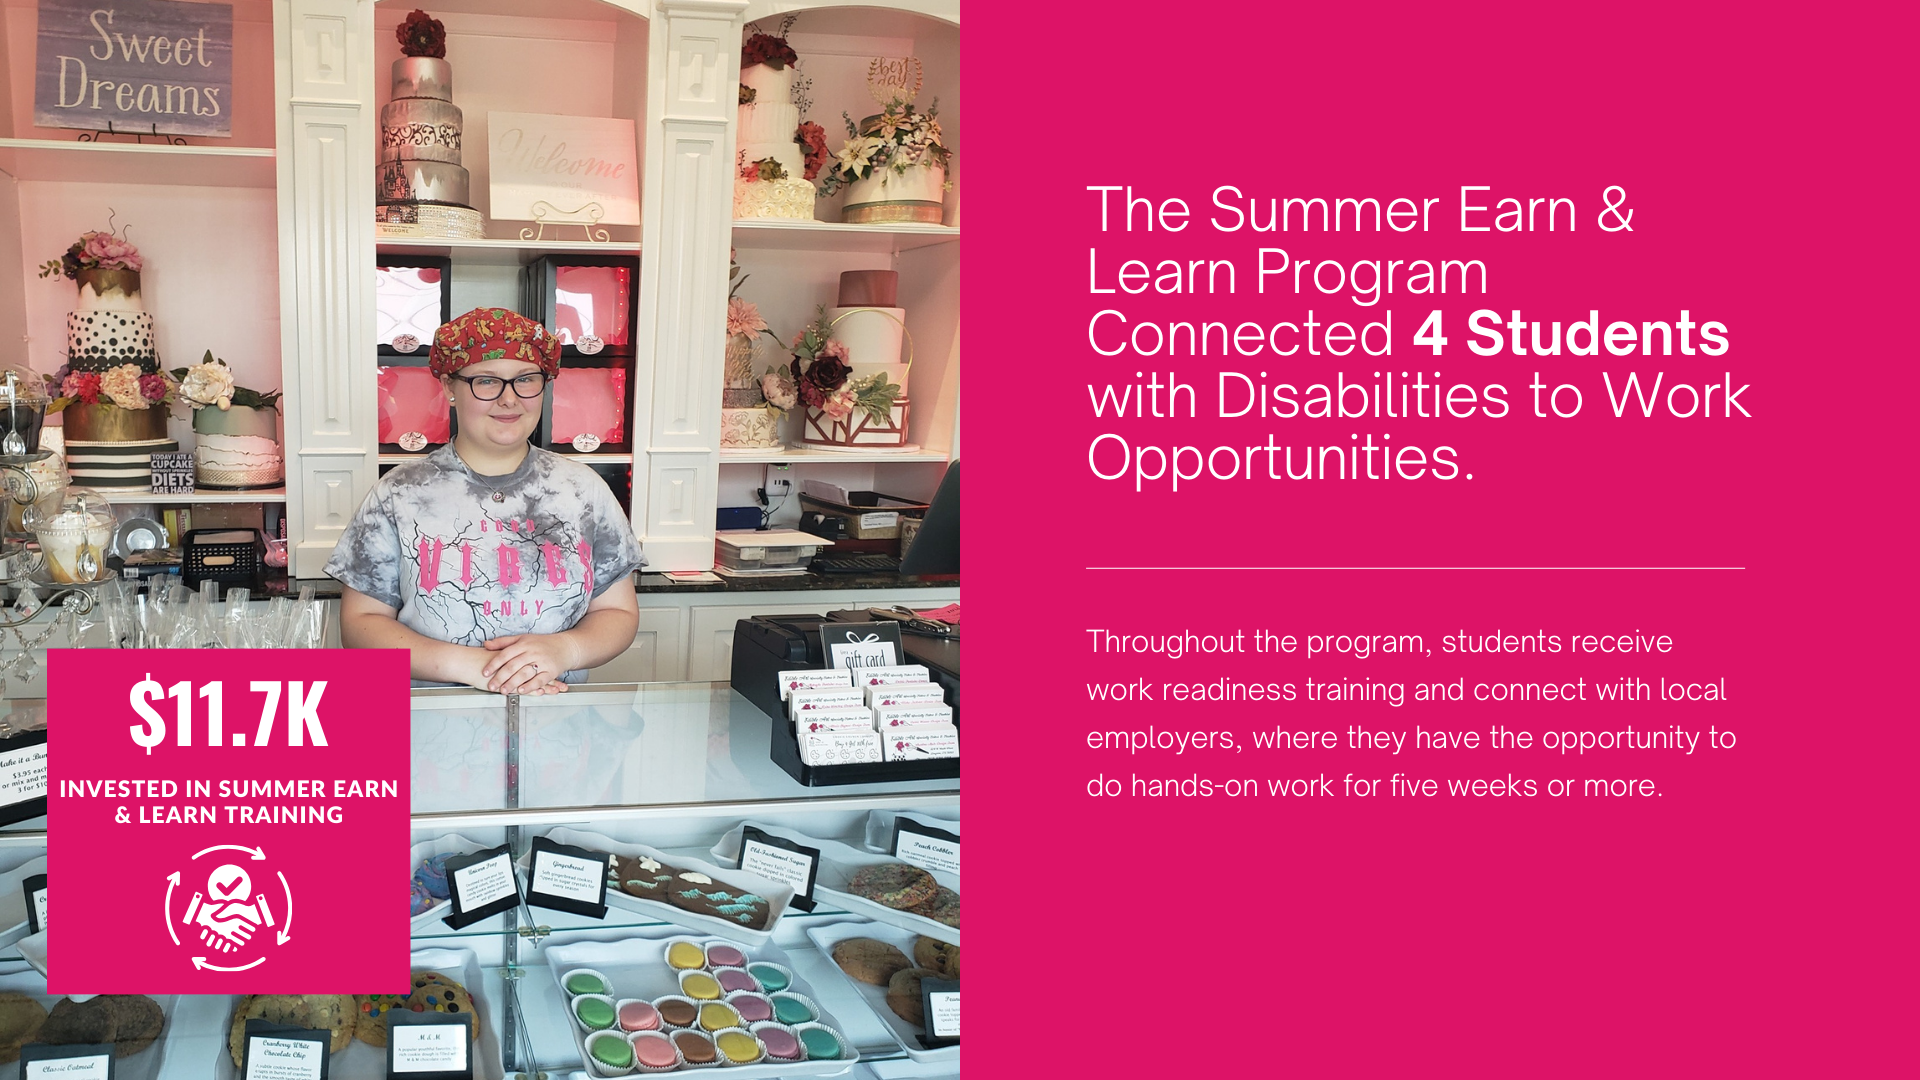 The summer earn and learn program connected 4 students with disabilities to work opportunities